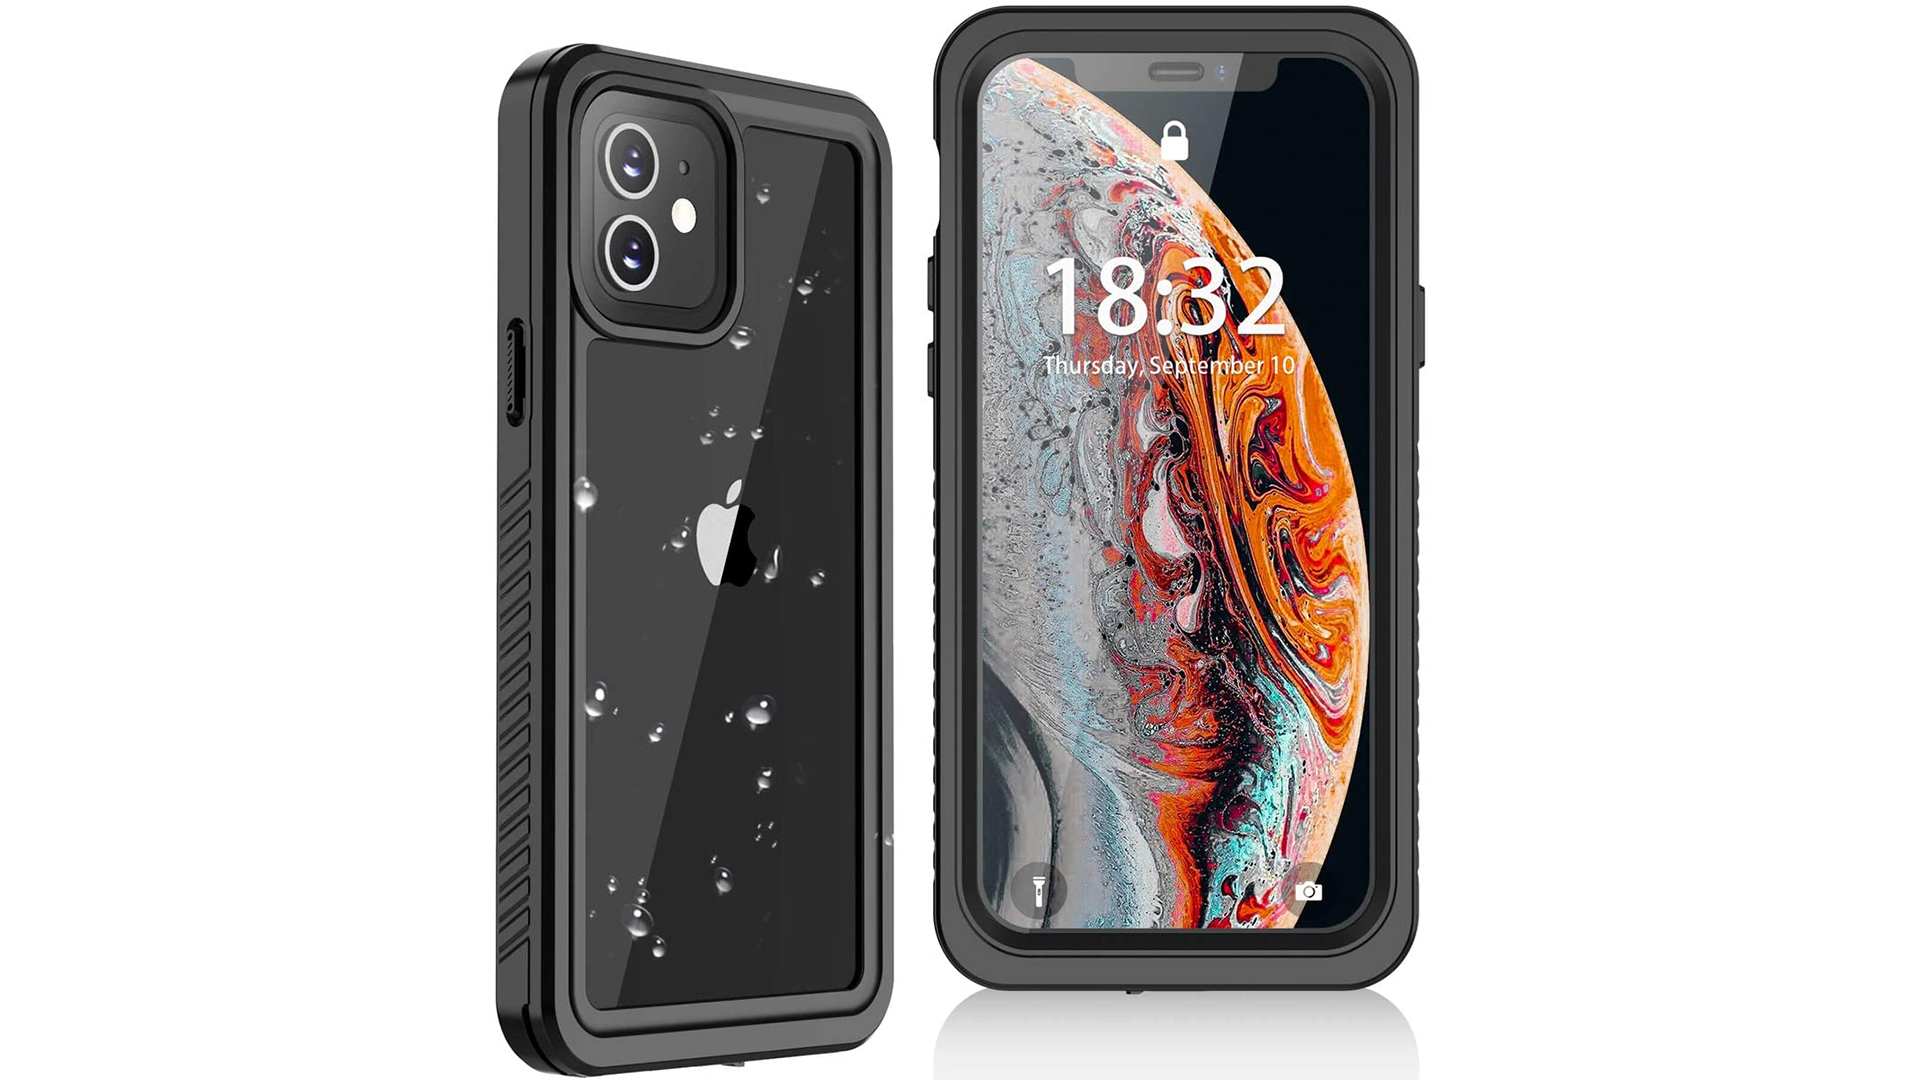 Best Iphone 12 And Iphone 12 Pro Cases To Protect Your New Phone